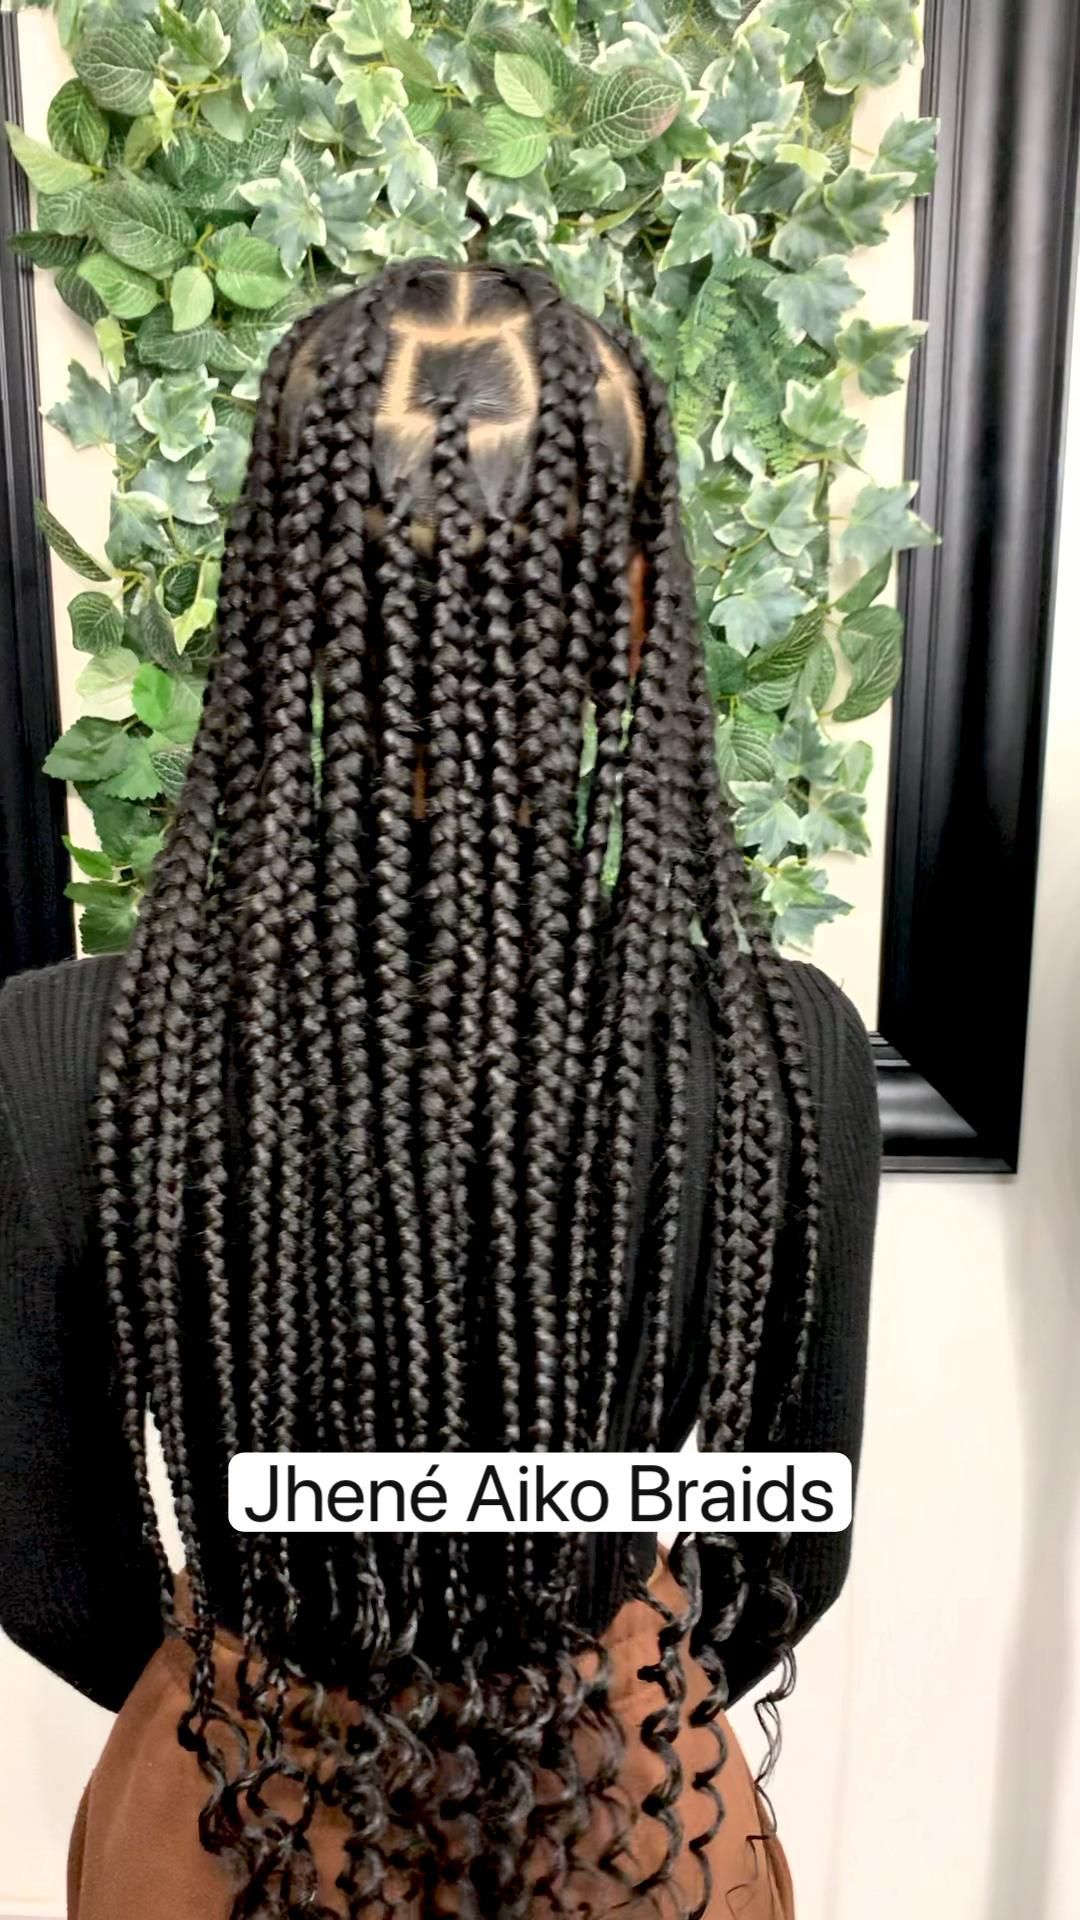 This contains an image of Jhene Aiko Braids 1